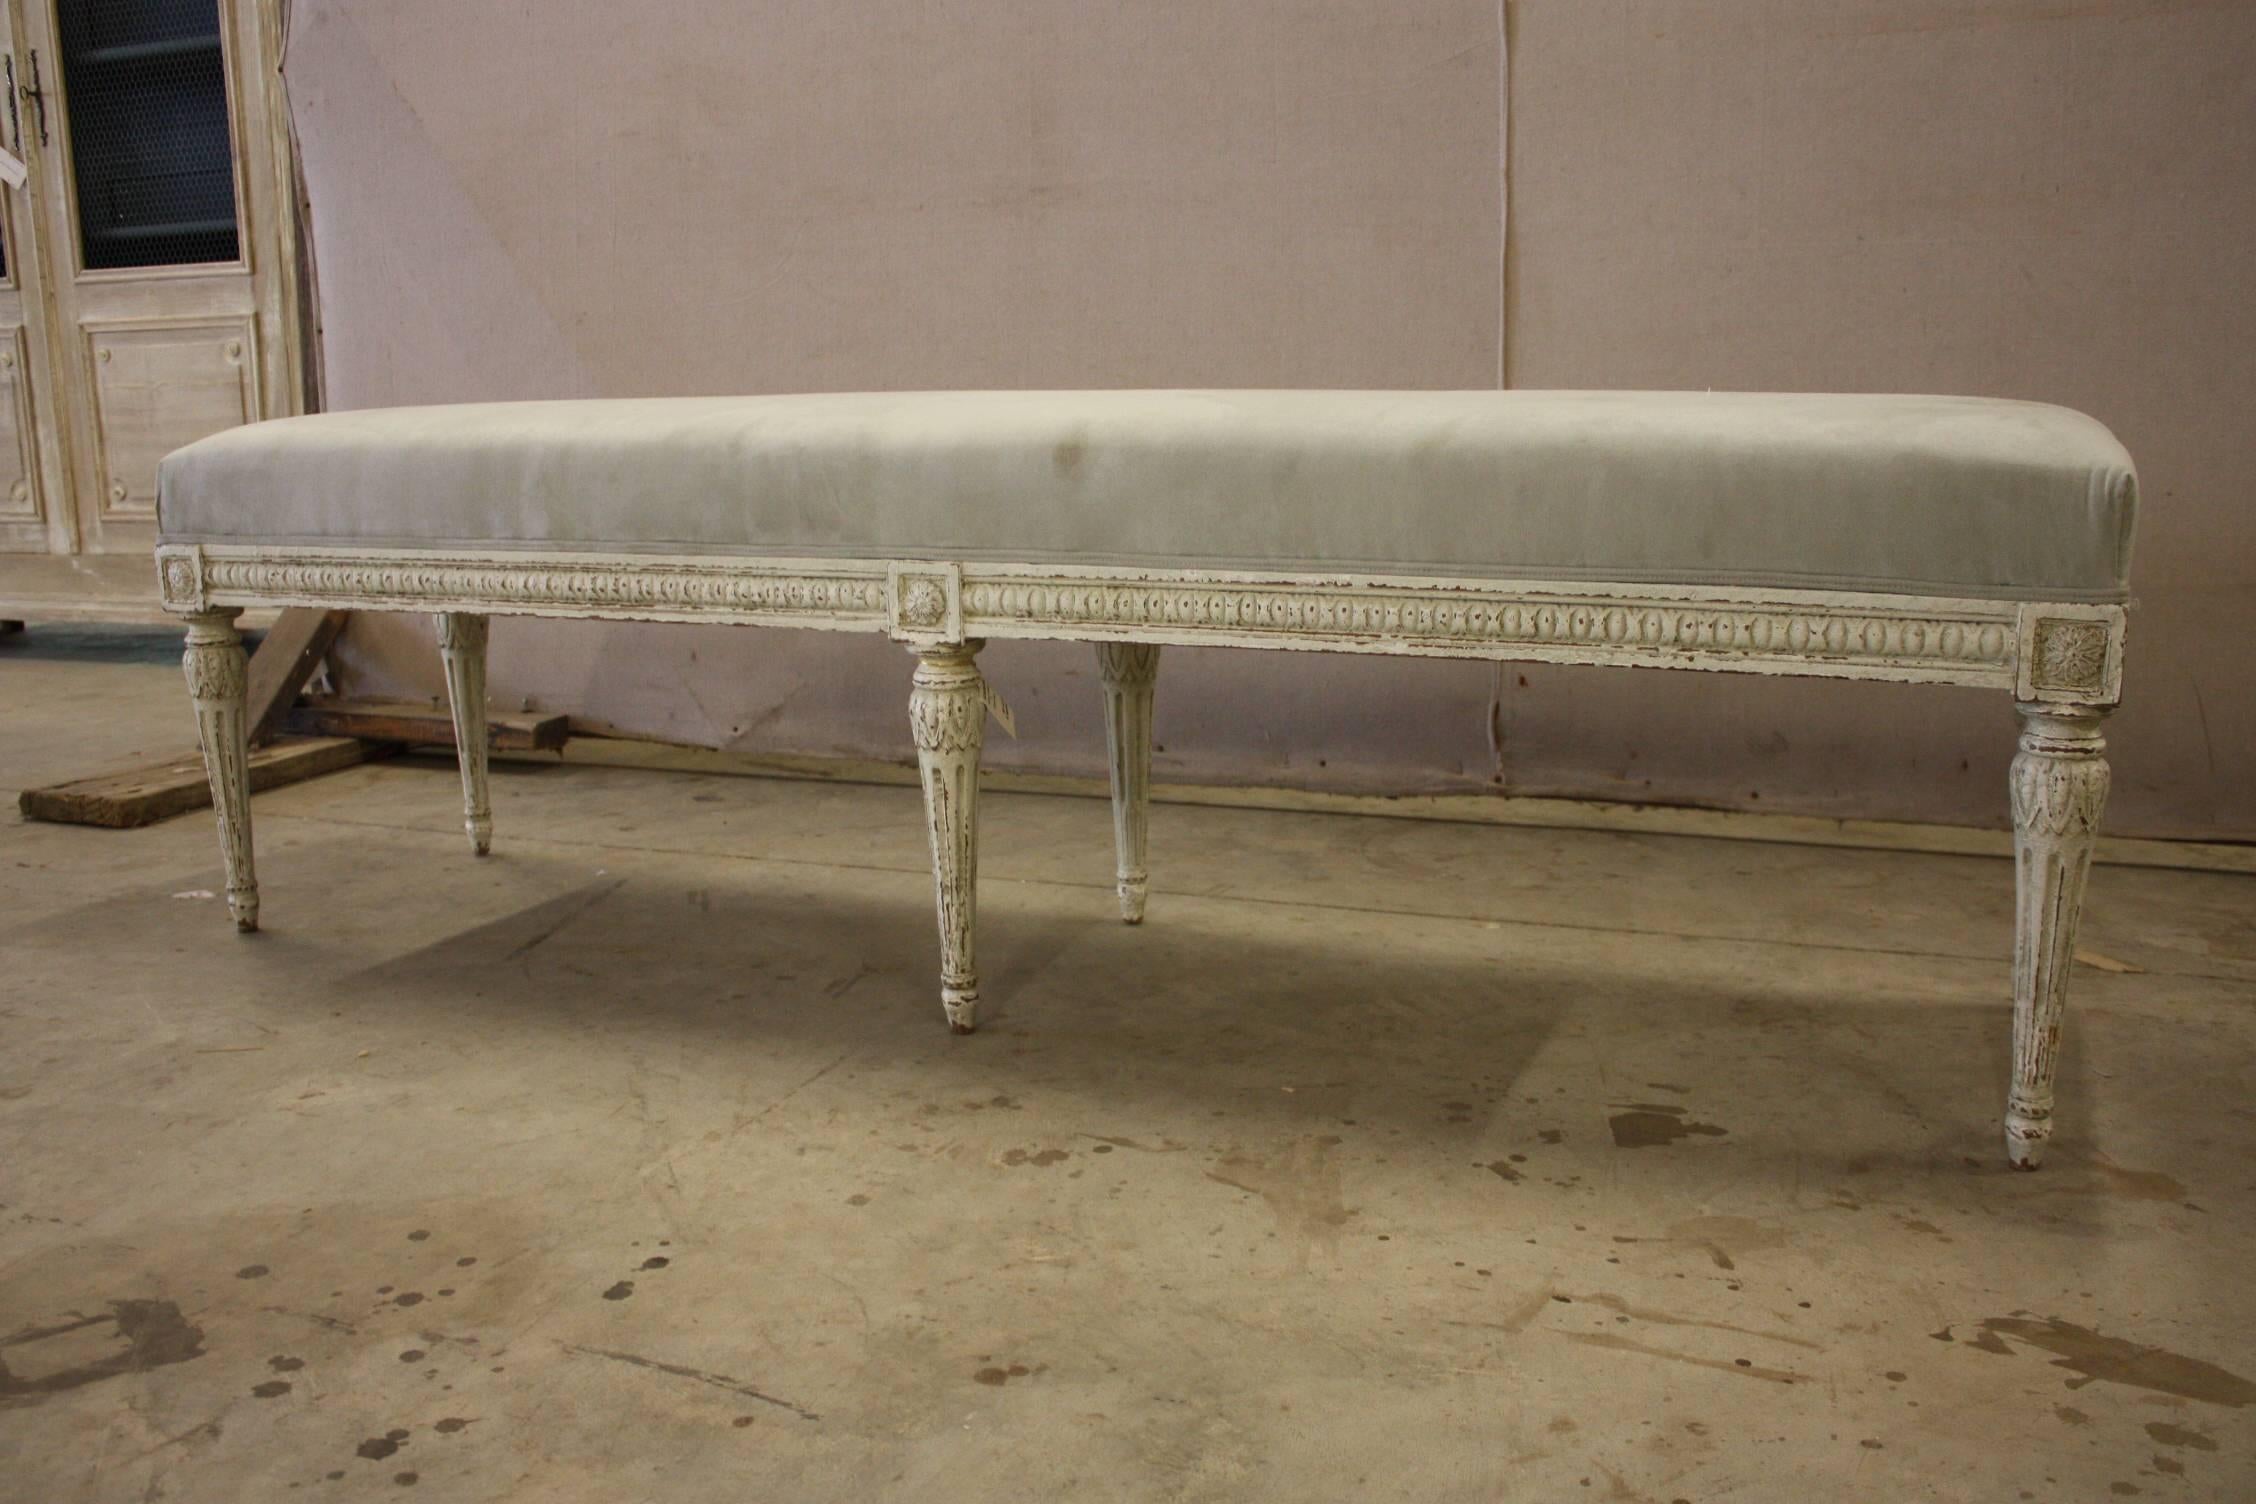 Louis XVI bench from France. Carved, circa 1880, the antique bench has six tapered legs, symmetrical carvings around the apron, and is reupholstered with a thick grey suede. Due to its size and narrow profile, the bench would also make the perfect